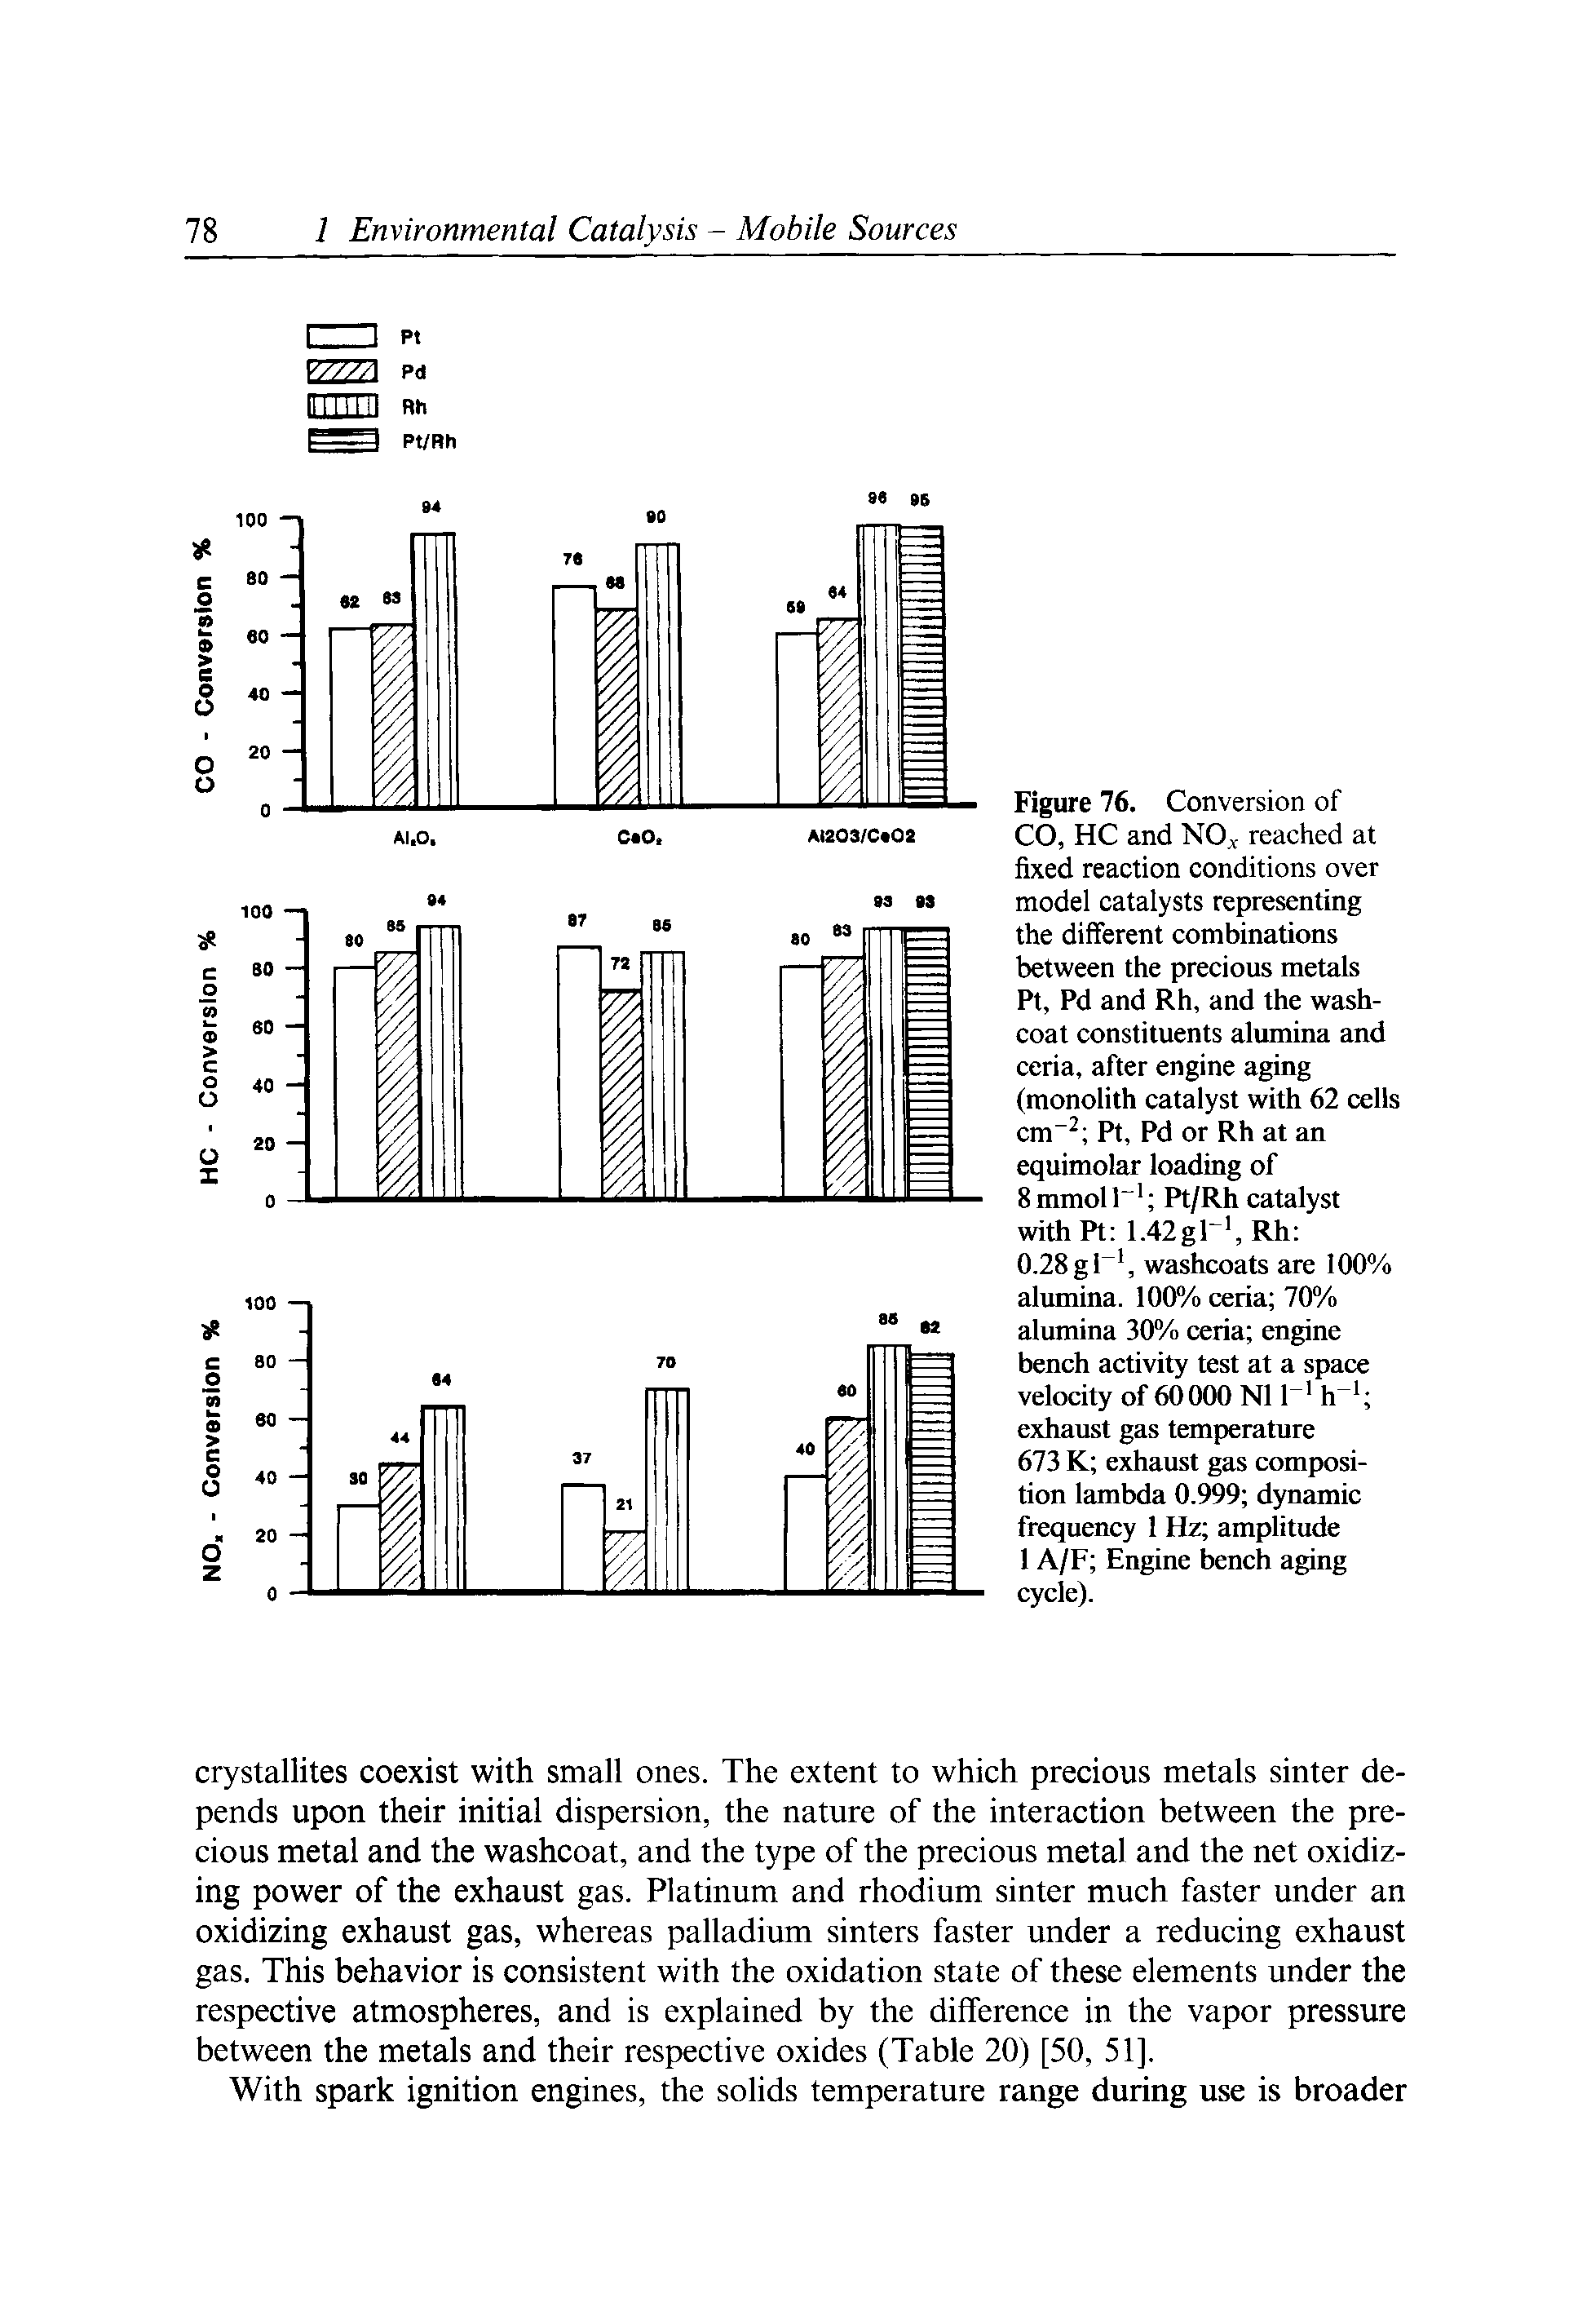 Figure 76. Conversion of CO, HC and NO < reached at fixed reaction conditions over model catalysts representing the different combinations between the precious metals Pt, Pd and Rh, and the wash-coat constituents alumina and ceria, after engine aging (monolith catalyst with 62 cells cm Pt, Pd or Rh at an equimolar loading of 8 mmol 1 Pt/Rh catalyst withPt 1.42gl, Rh ...